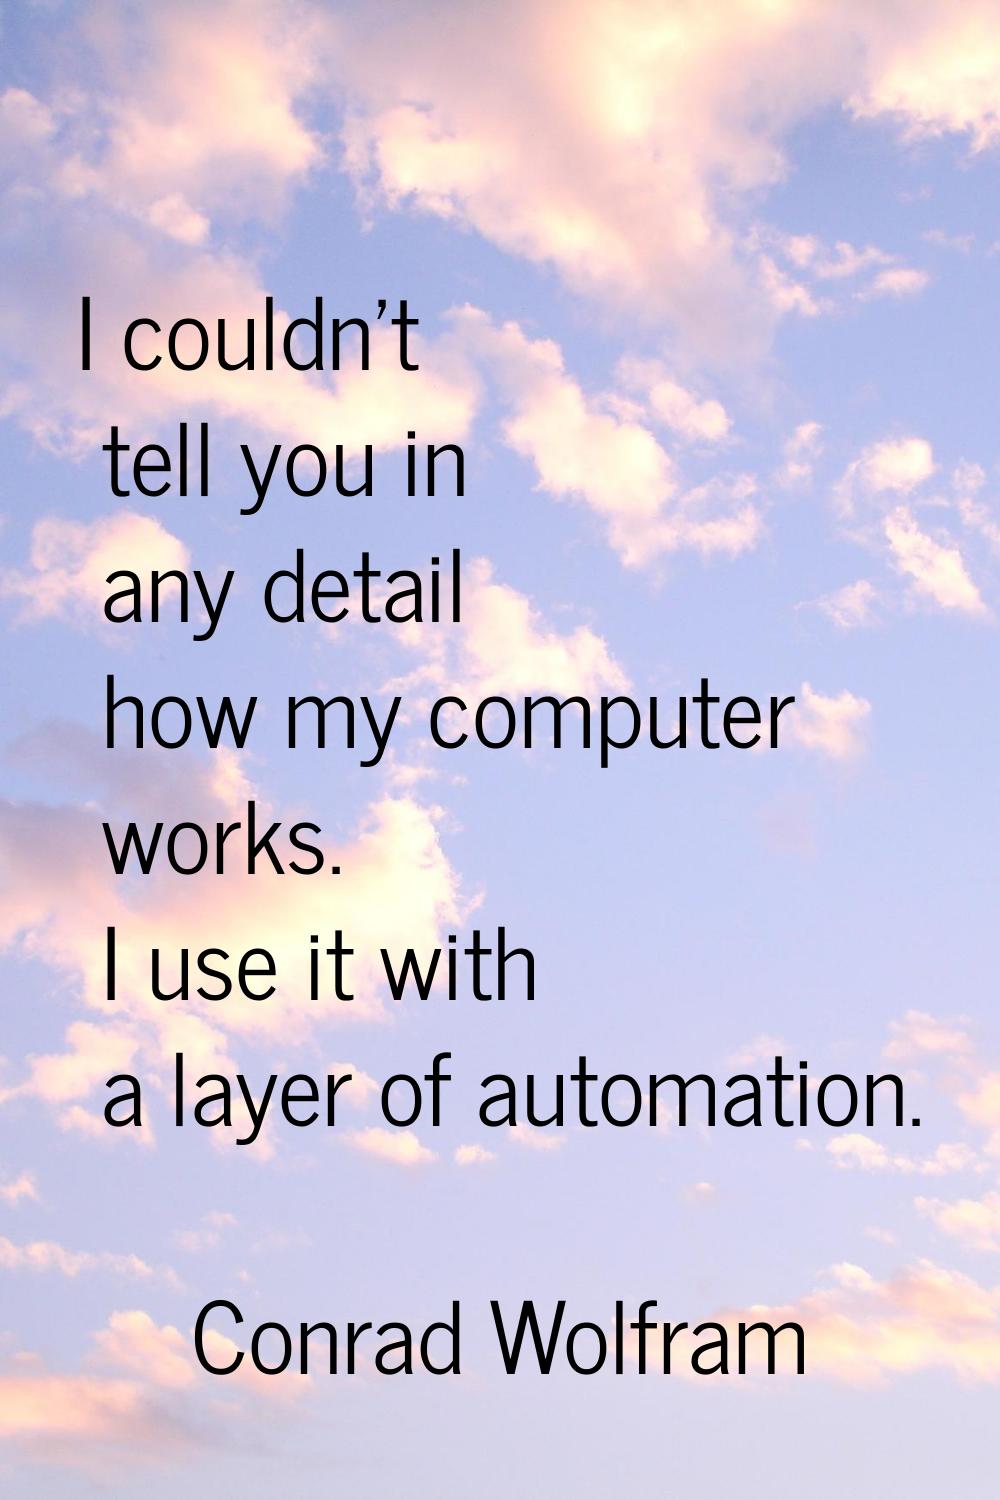 I couldn't tell you in any detail how my computer works. I use it with a layer of automation.